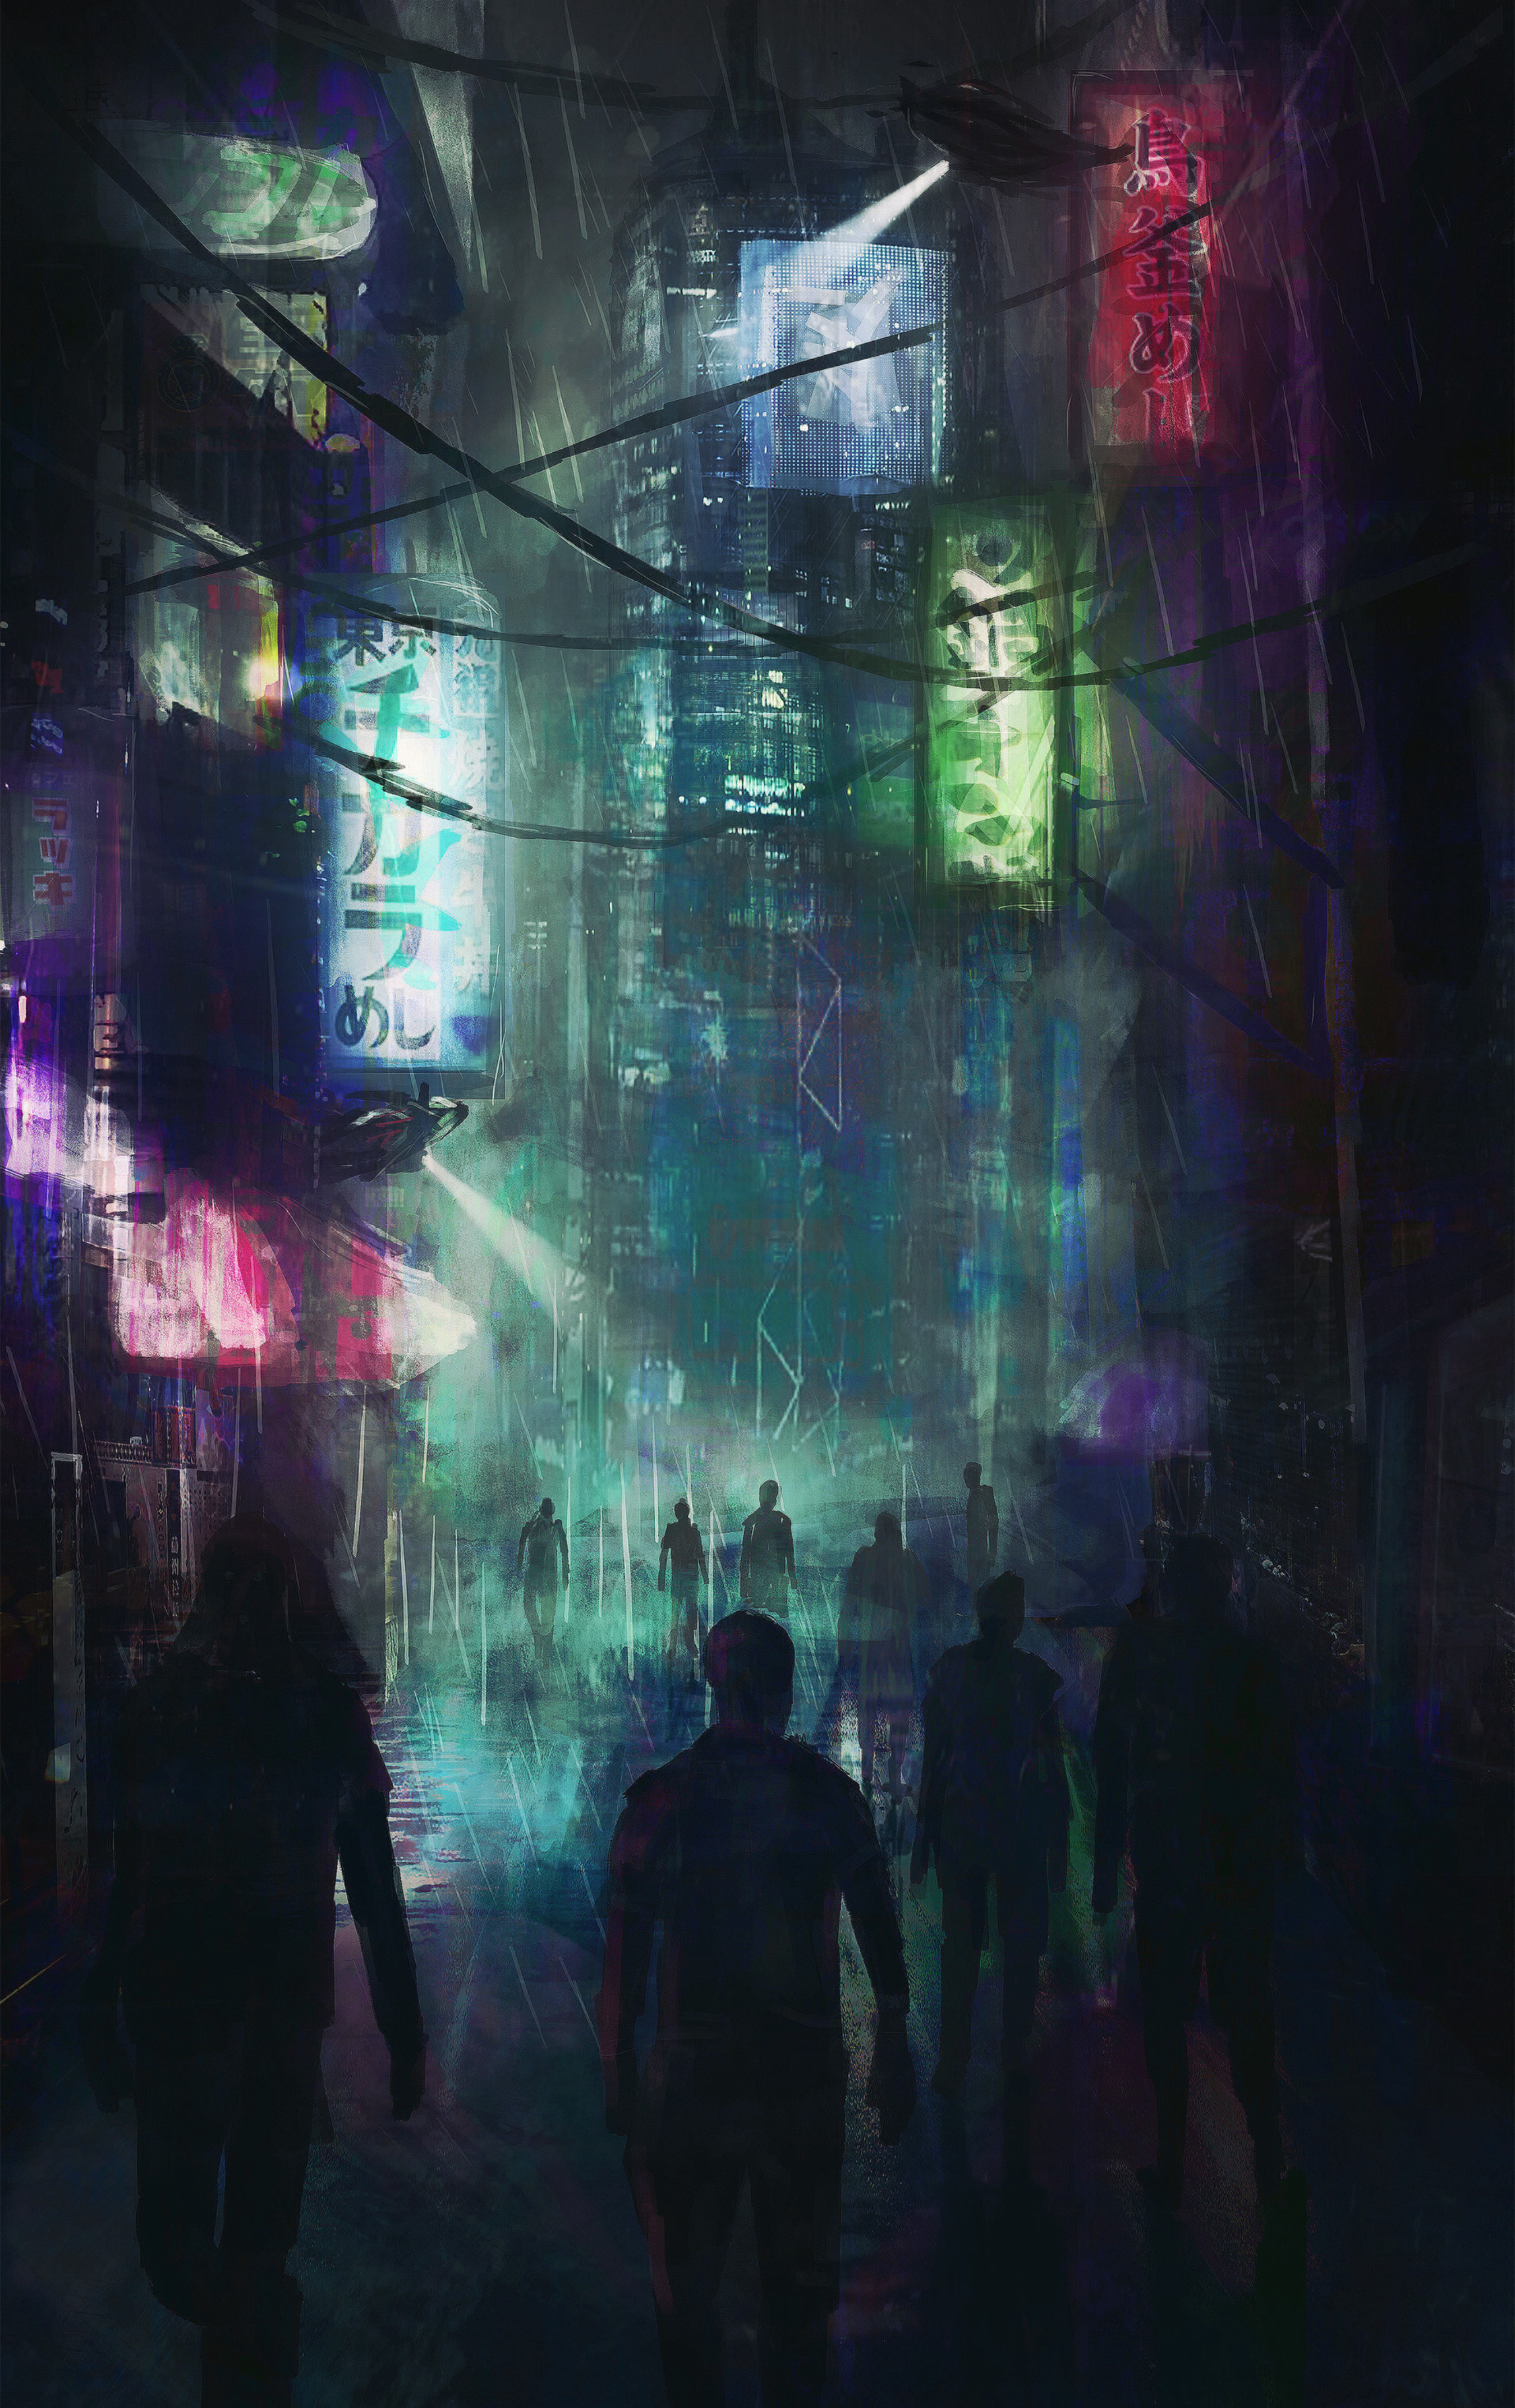 91884 download wallpaper cyberpunk, city, art, silhouettes, night city, crowd screensavers and pictures for free